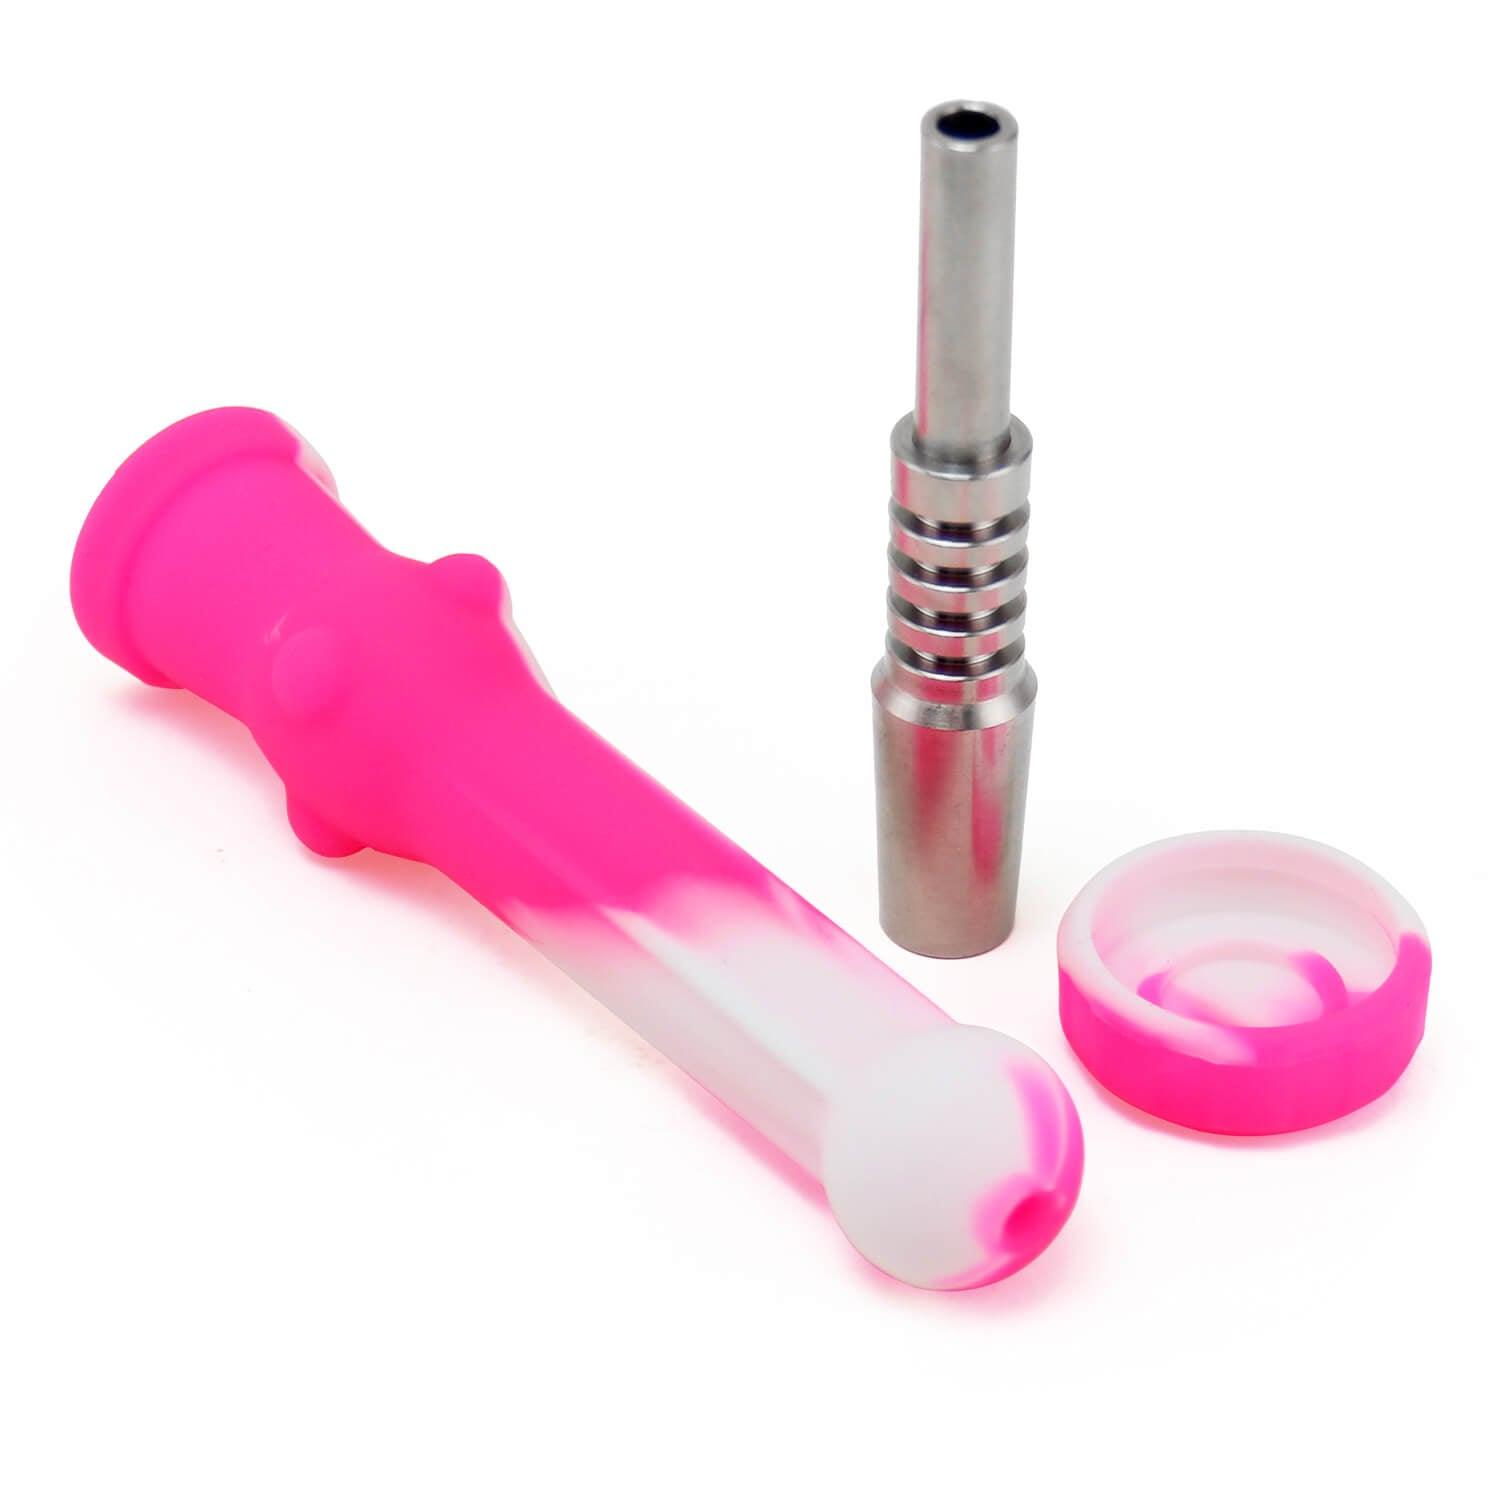 Silicone Nectar Collector Dab - PILOT DIARY